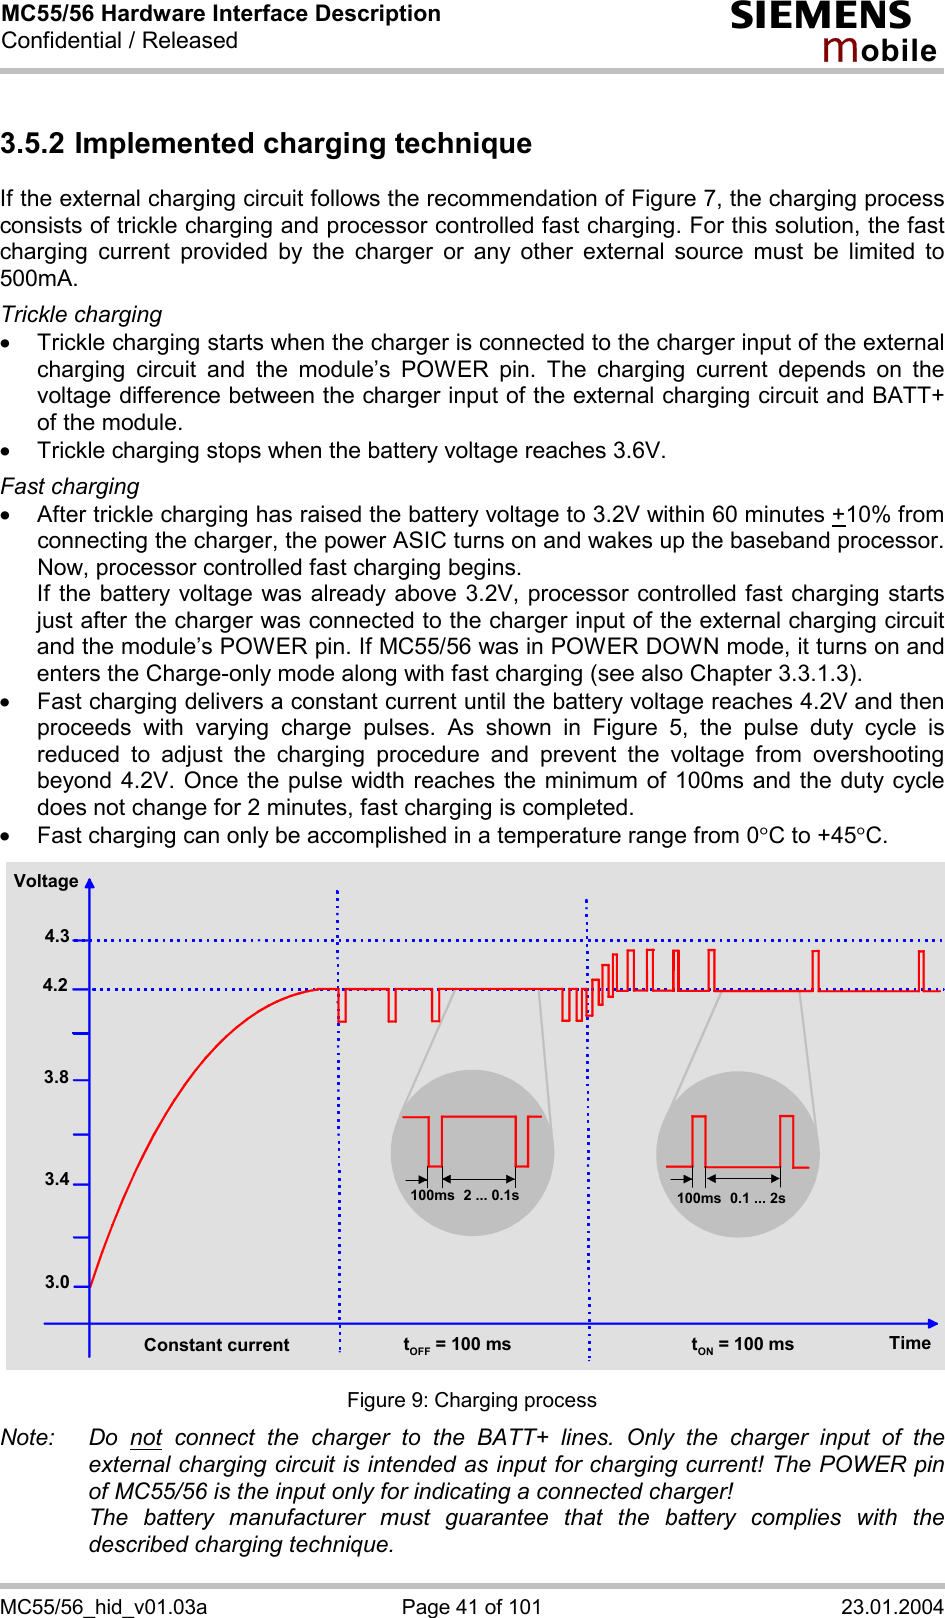 MC55/56 Hardware Interface Description Confidential / Released s mo b i l e MC55/56_hid_v01.03a  Page 41 of 101  23.01.2004 3.5.2 Implemented charging technique If the external charging circuit follows the recommendation of Figure 7, the charging process consists of trickle charging and processor controlled fast charging. For this solution, the fast charging current provided by the charger or any other external source must be limited to 500mA.   Trickle charging ·  Trickle charging starts when the charger is connected to the charger input of the external charging circuit and the module’s POWER pin. The charging current depends on the voltage difference between the charger input of the external charging circuit and BATT+ of the module.  ·  Trickle charging stops when the battery voltage reaches 3.6V.  Fast charging  ·  After trickle charging has raised the battery voltage to 3.2V within 60 minutes +10% from connecting the charger, the power ASIC turns on and wakes up the baseband processor. Now, processor controlled fast charging begins.  If the battery voltage was already above 3.2V, processor controlled fast charging starts just after the charger was connected to the charger input of the external charging circuit and the module’s POWER pin. If MC55/56 was in POWER DOWN mode, it turns on and enters the Charge-only mode along with fast charging (see also Chapter 3.3.1.3). ·  Fast charging delivers a constant current until the battery voltage reaches 4.2V and then proceeds with varying charge pulses. As shown in Figure 5, the pulse duty cycle is reduced to adjust the charging procedure and prevent the voltage from overshooting beyond 4.2V. Once the pulse width reaches the minimum of 100ms and the duty cycle does not change for 2 minutes, fast charging is completed. ·  Fast charging can only be accomplished in a temperature range from 0°C to +45°C.  4.34.23.8Voltage3.43.0Constant current tOFF = 100 ms tON = 100 ms Time100ms 2 ... 0.1s 100ms 0.1 ... 2s  Figure 9: Charging process Note: Do not connect the charger to the BATT+ lines. Only the charger input of the external charging circuit is intended as input for charging current! The POWER pin of MC55/56 is the input only for indicating a connected charger!   The battery manufacturer must guarantee that the battery complies with the described charging technique.  